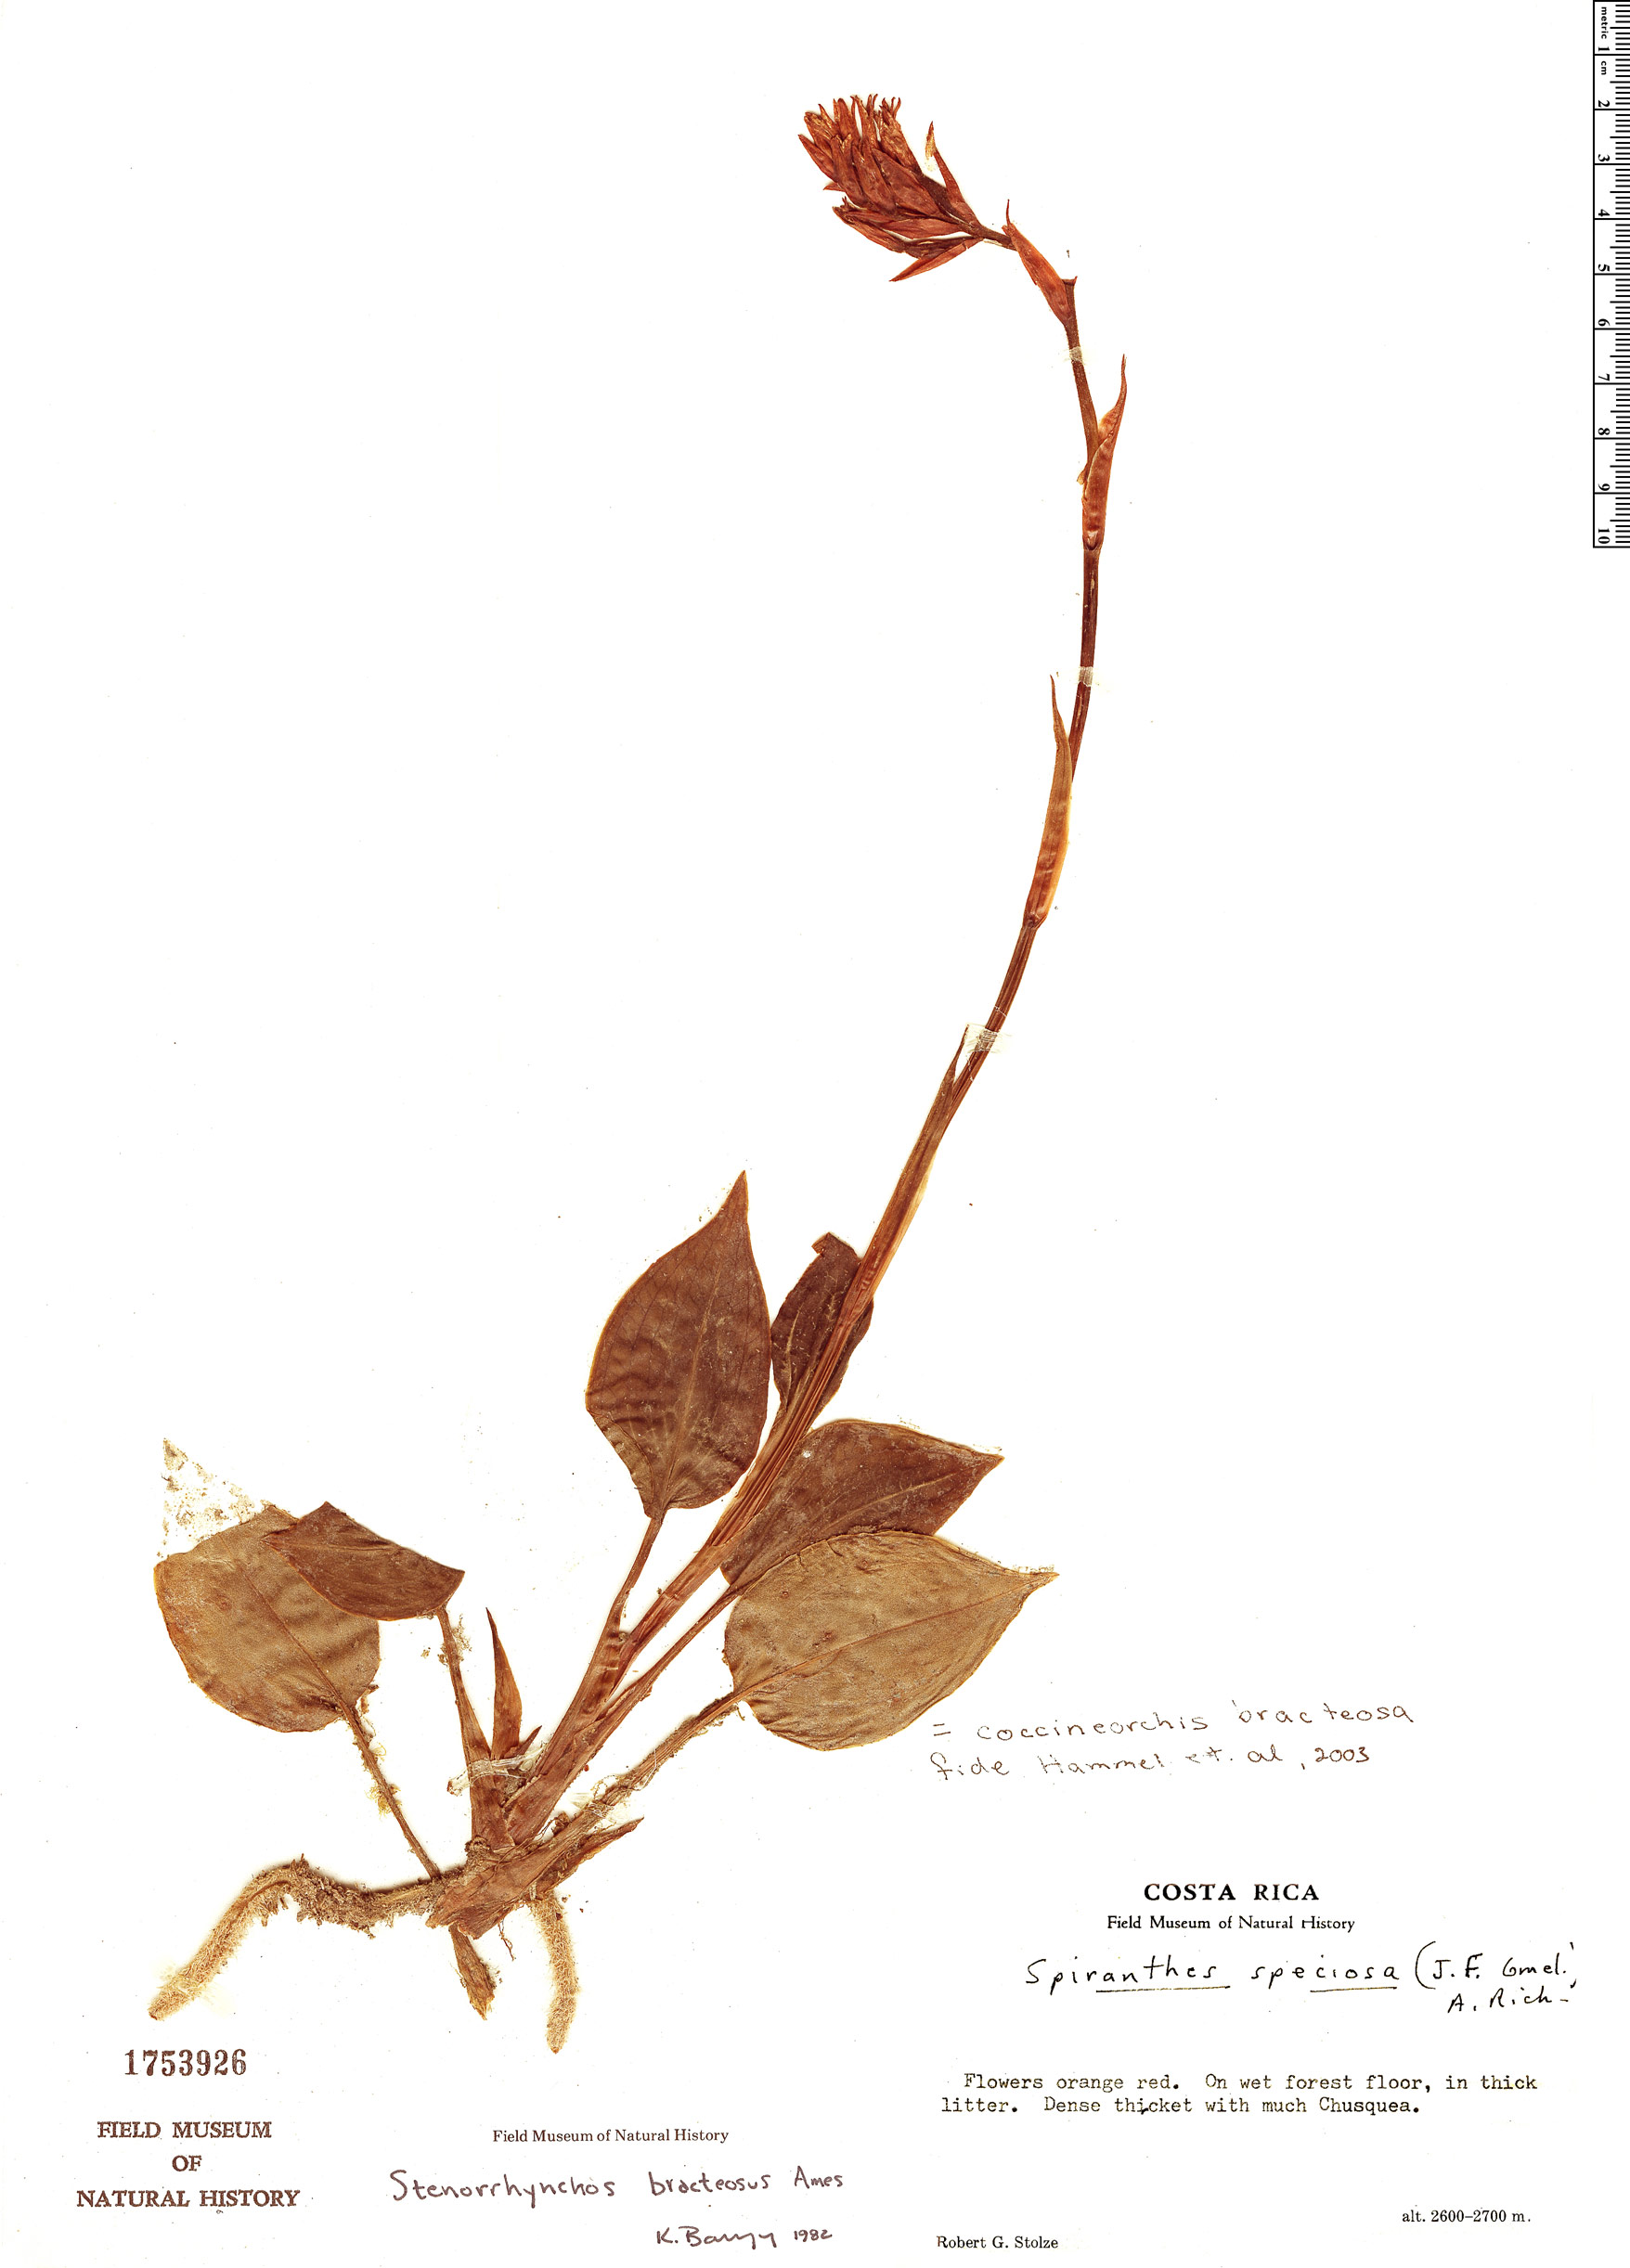 Coccineorchis image